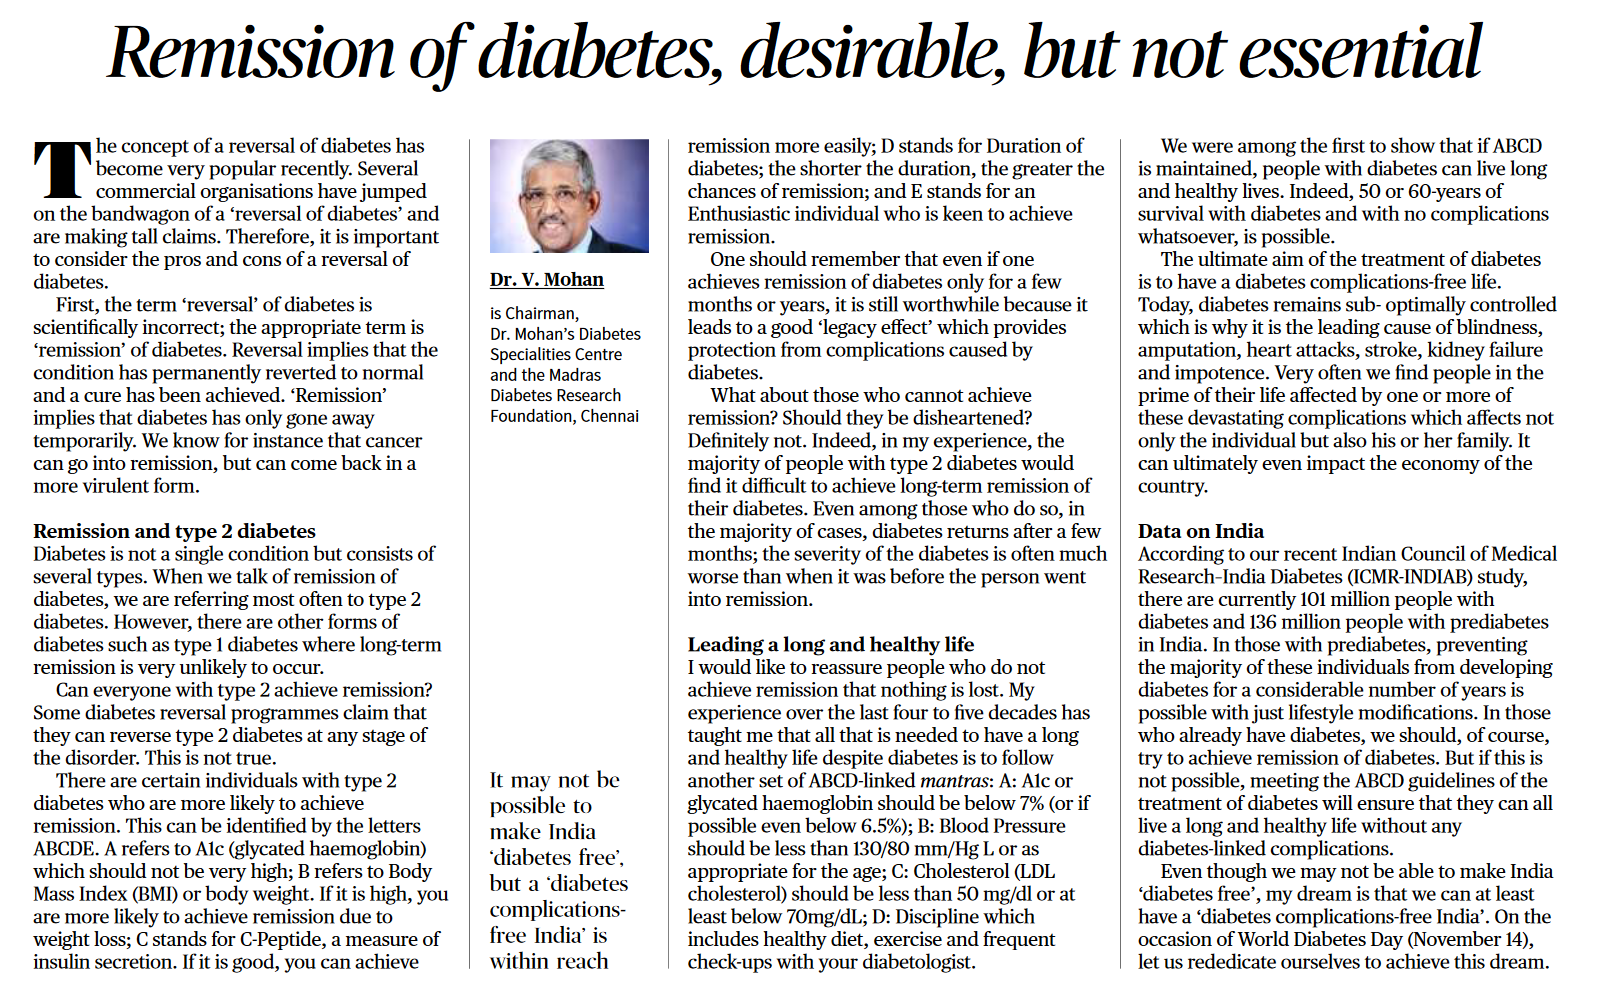 Remission of diabetes, desirable, but not essential - Page No.6, GS 2